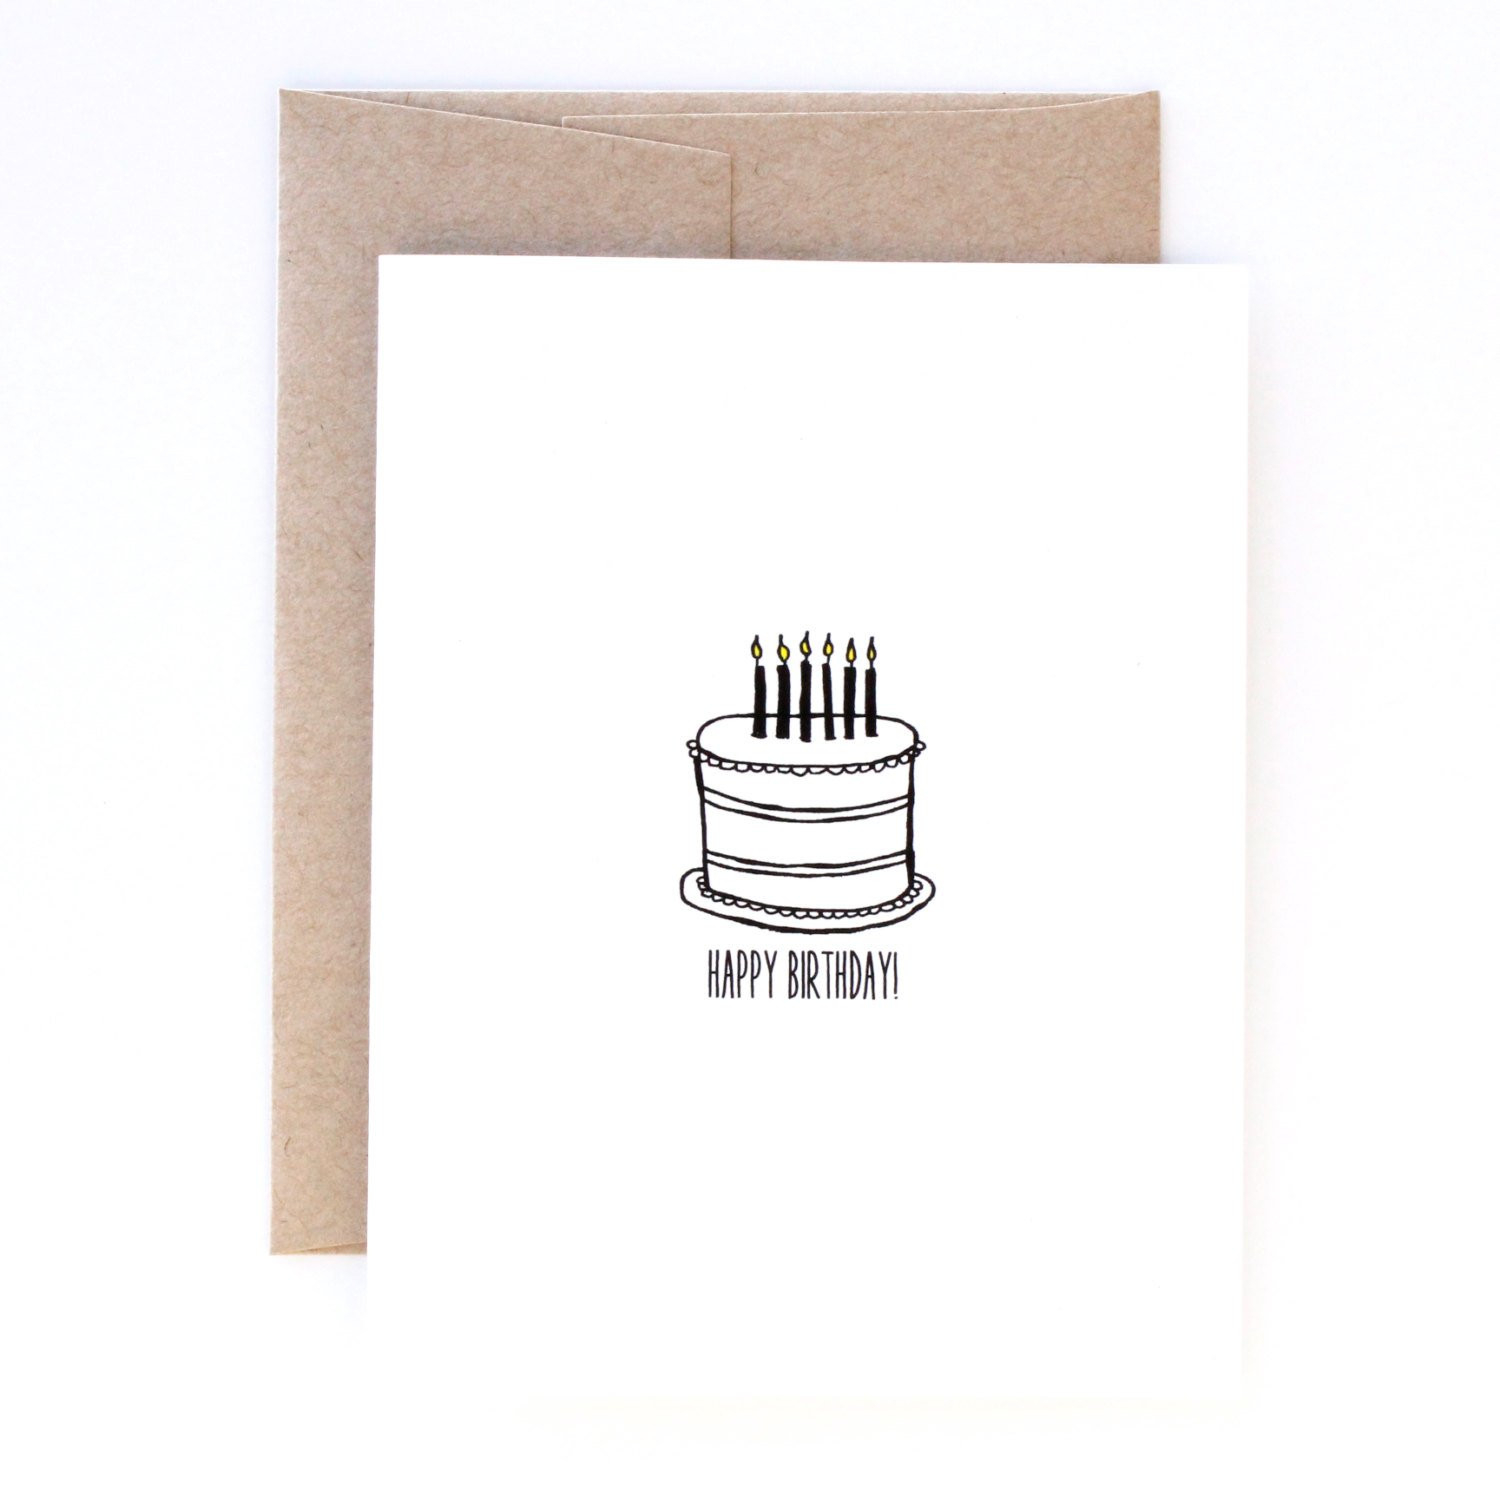 Male Birthday Card Ideas 20 Of The Best Ideas For Minimalist Birthday Card Home Inspiration